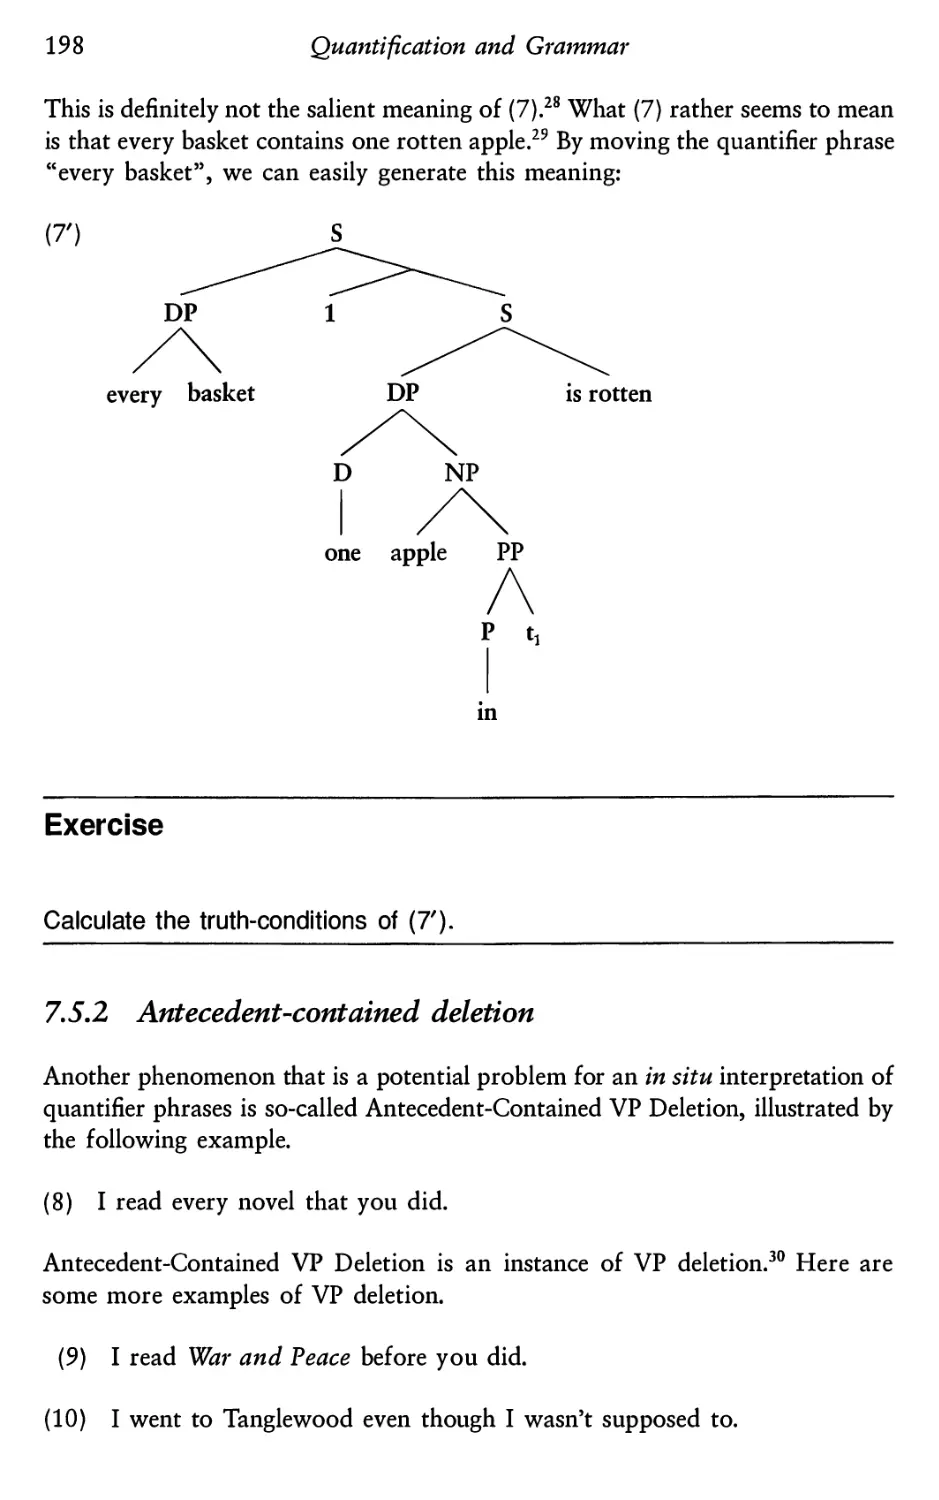 7.5.2 Antecedent-contained deletion